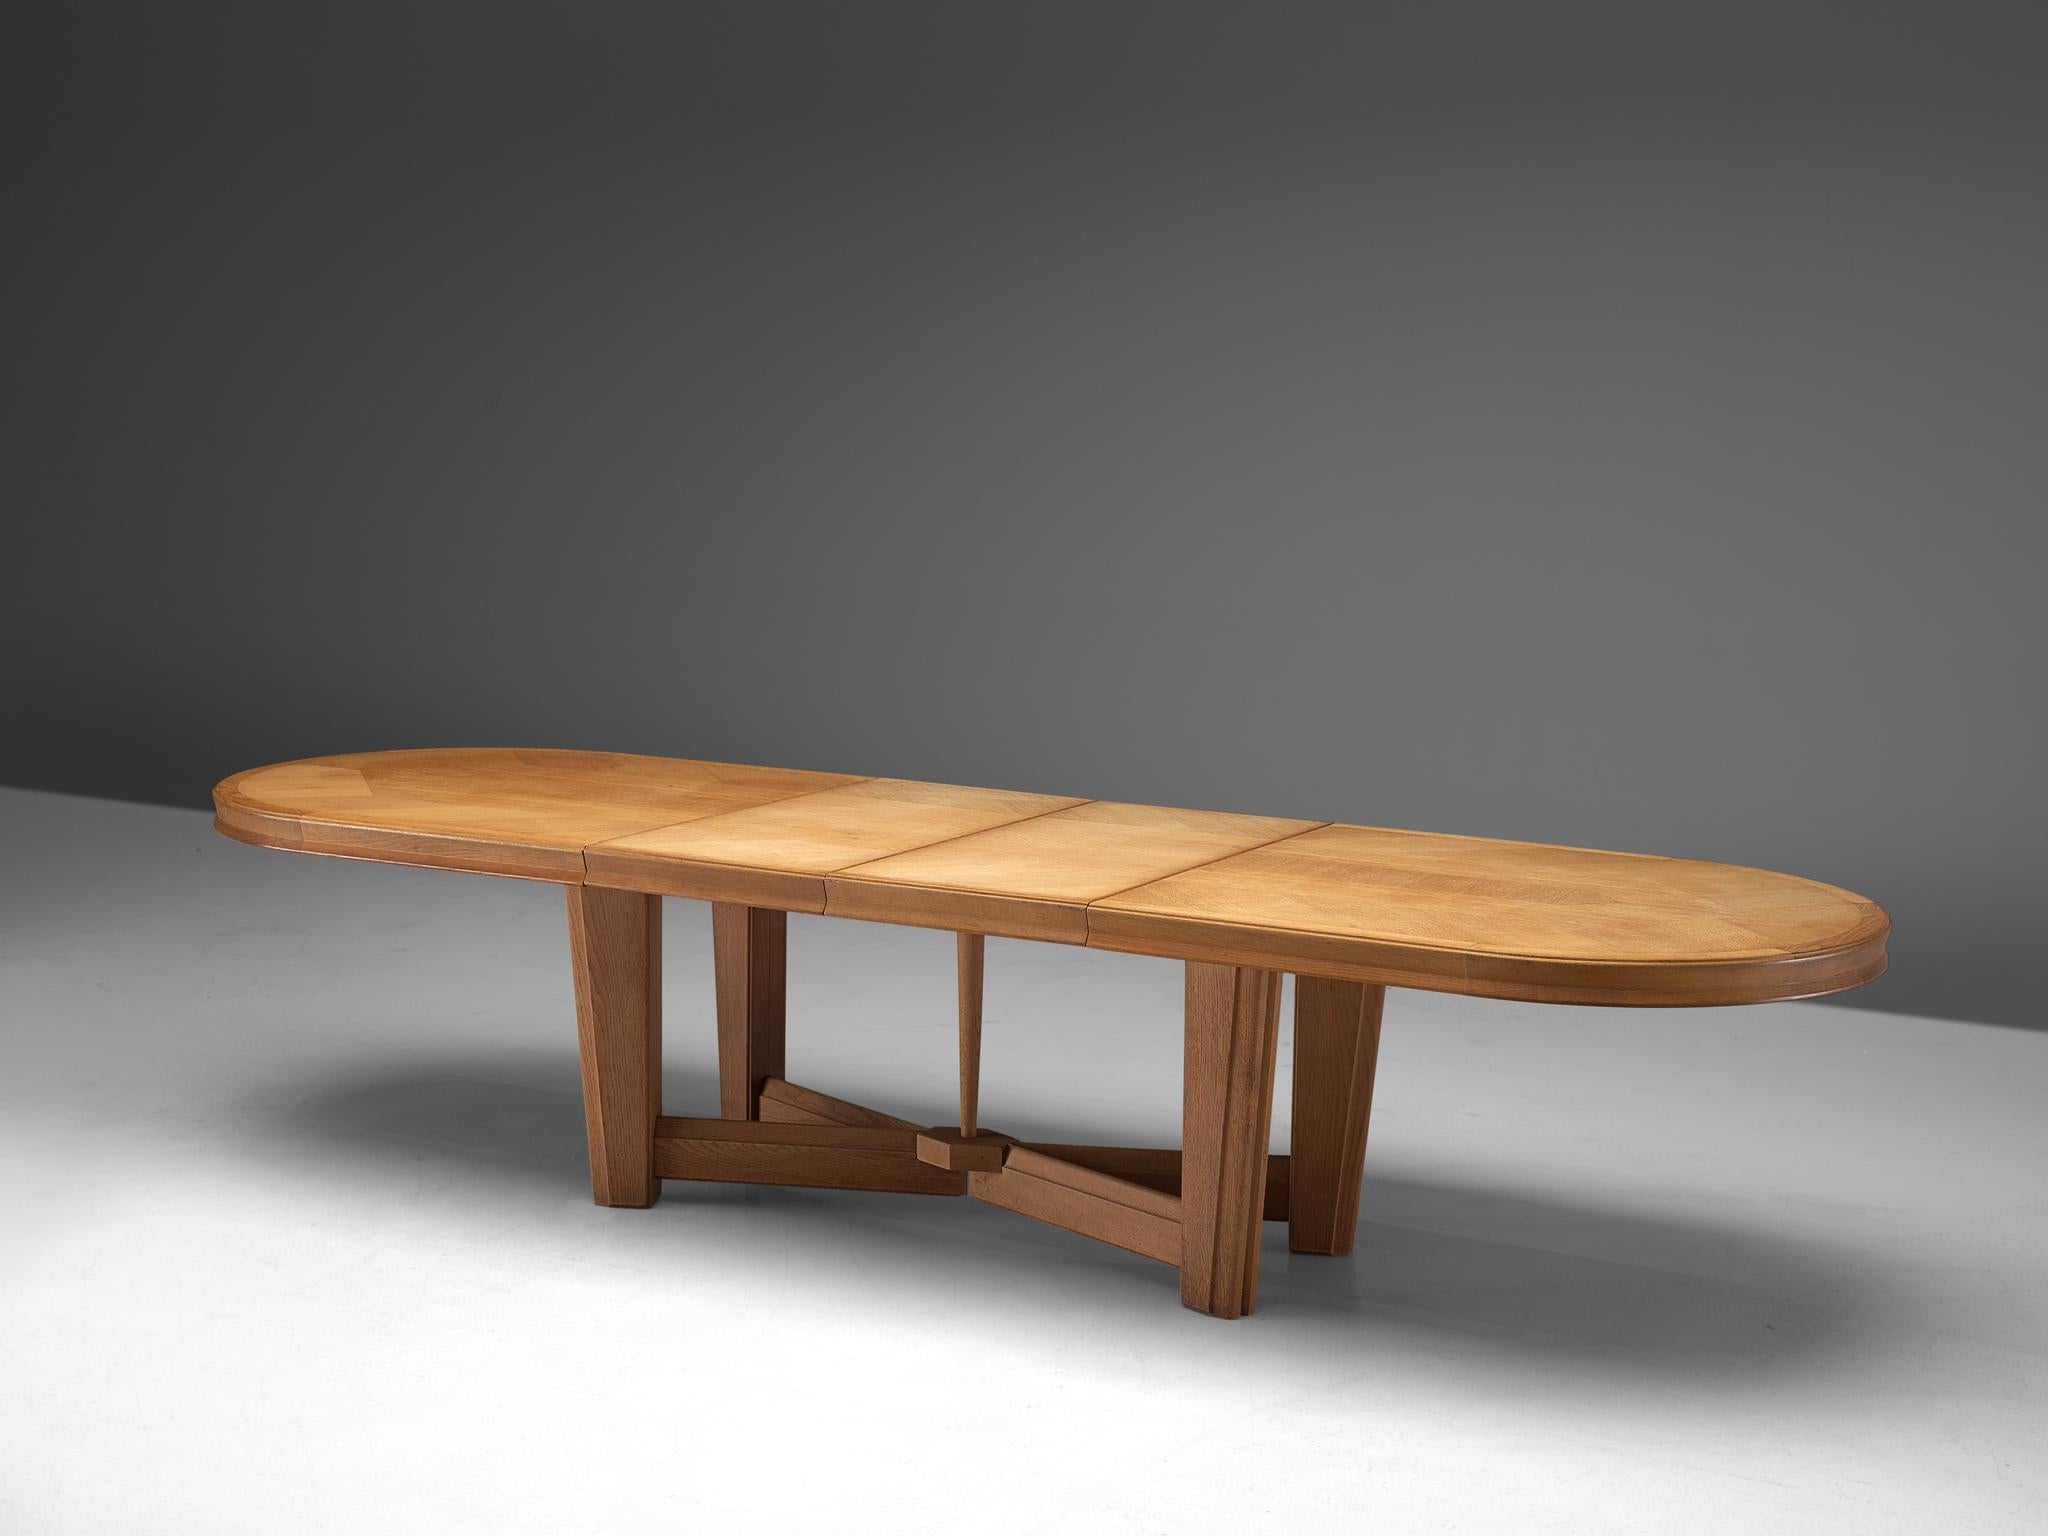 Guillerme et Chambron, extendable dining table, oak, 1960s.

Large oval shaped dining table with inlayed top. This extendable table in solid oak comes with two additional leafs, which add 1m/39inches and makes it a very versatile piece. The